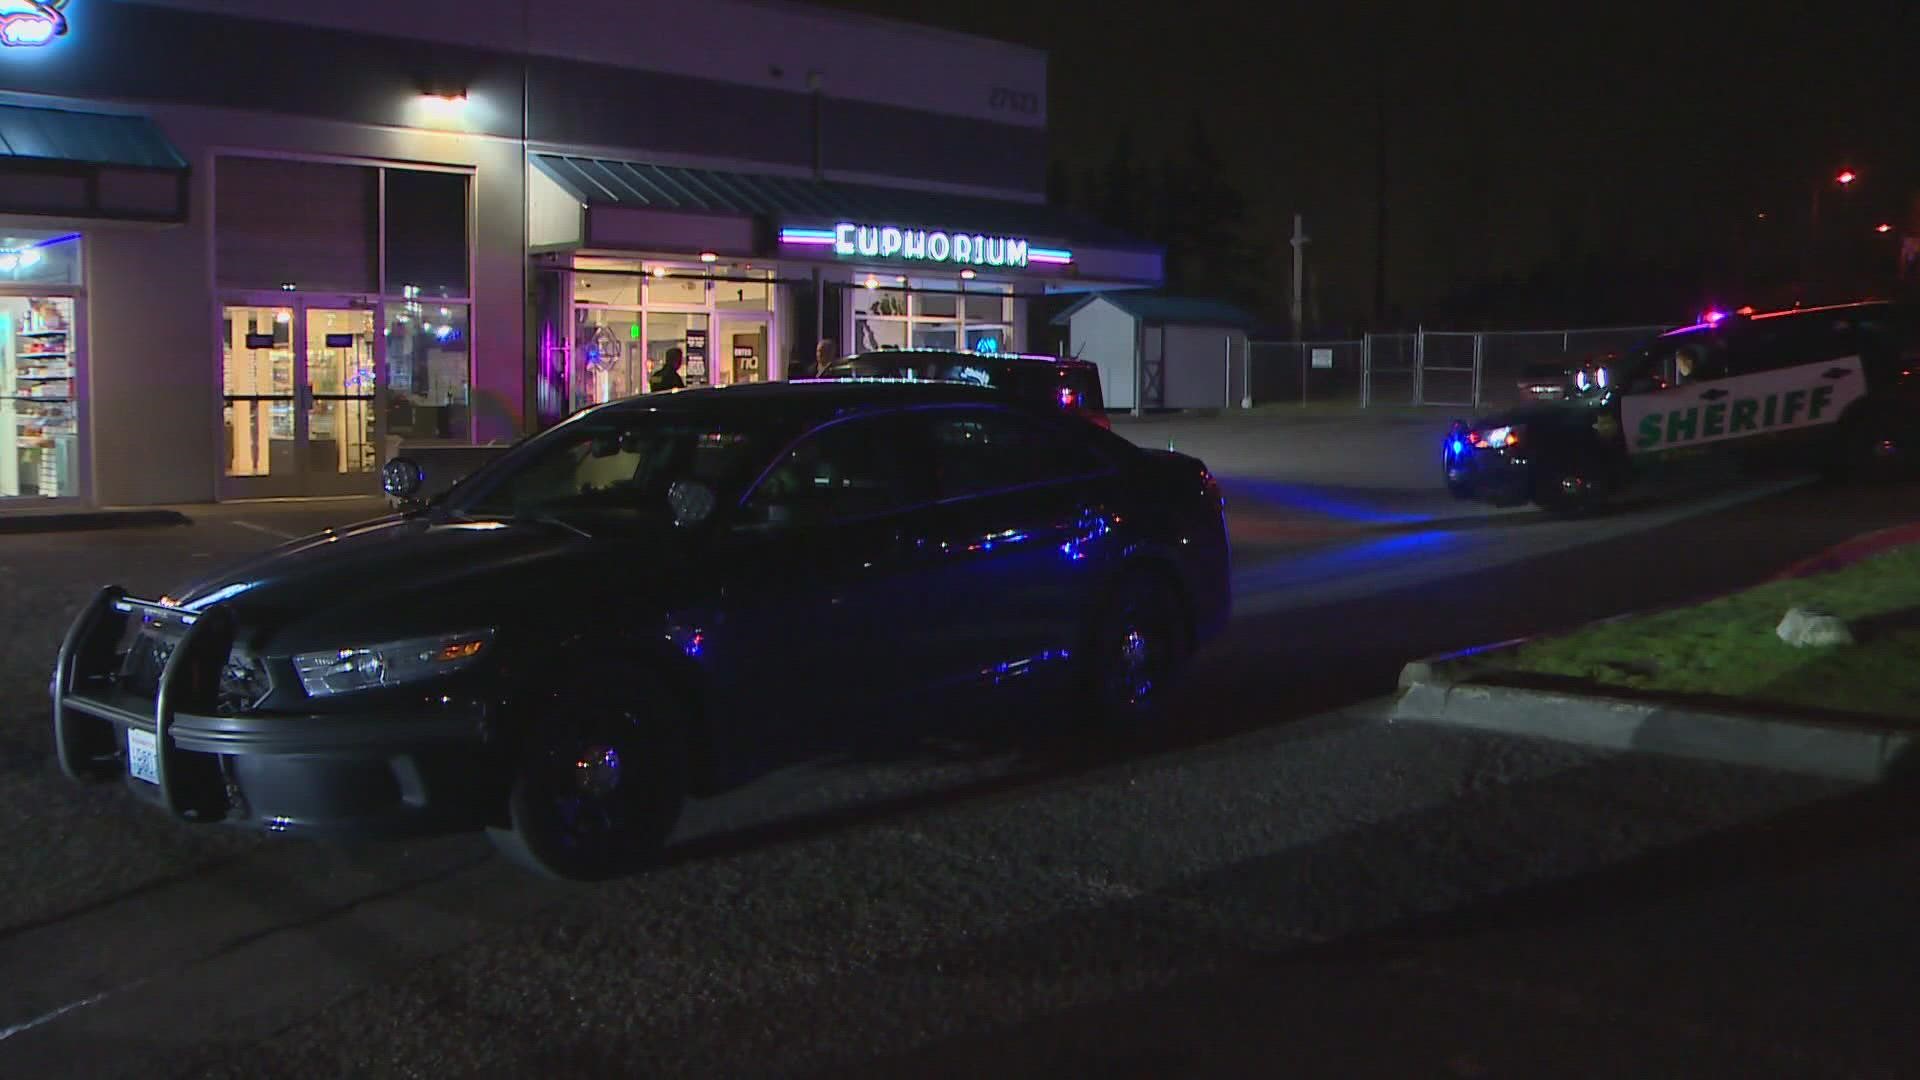 A man in his late teens to early 20s was shot and killed by an employee while attempting to rob a marijuana store in Covington Thursday evening.